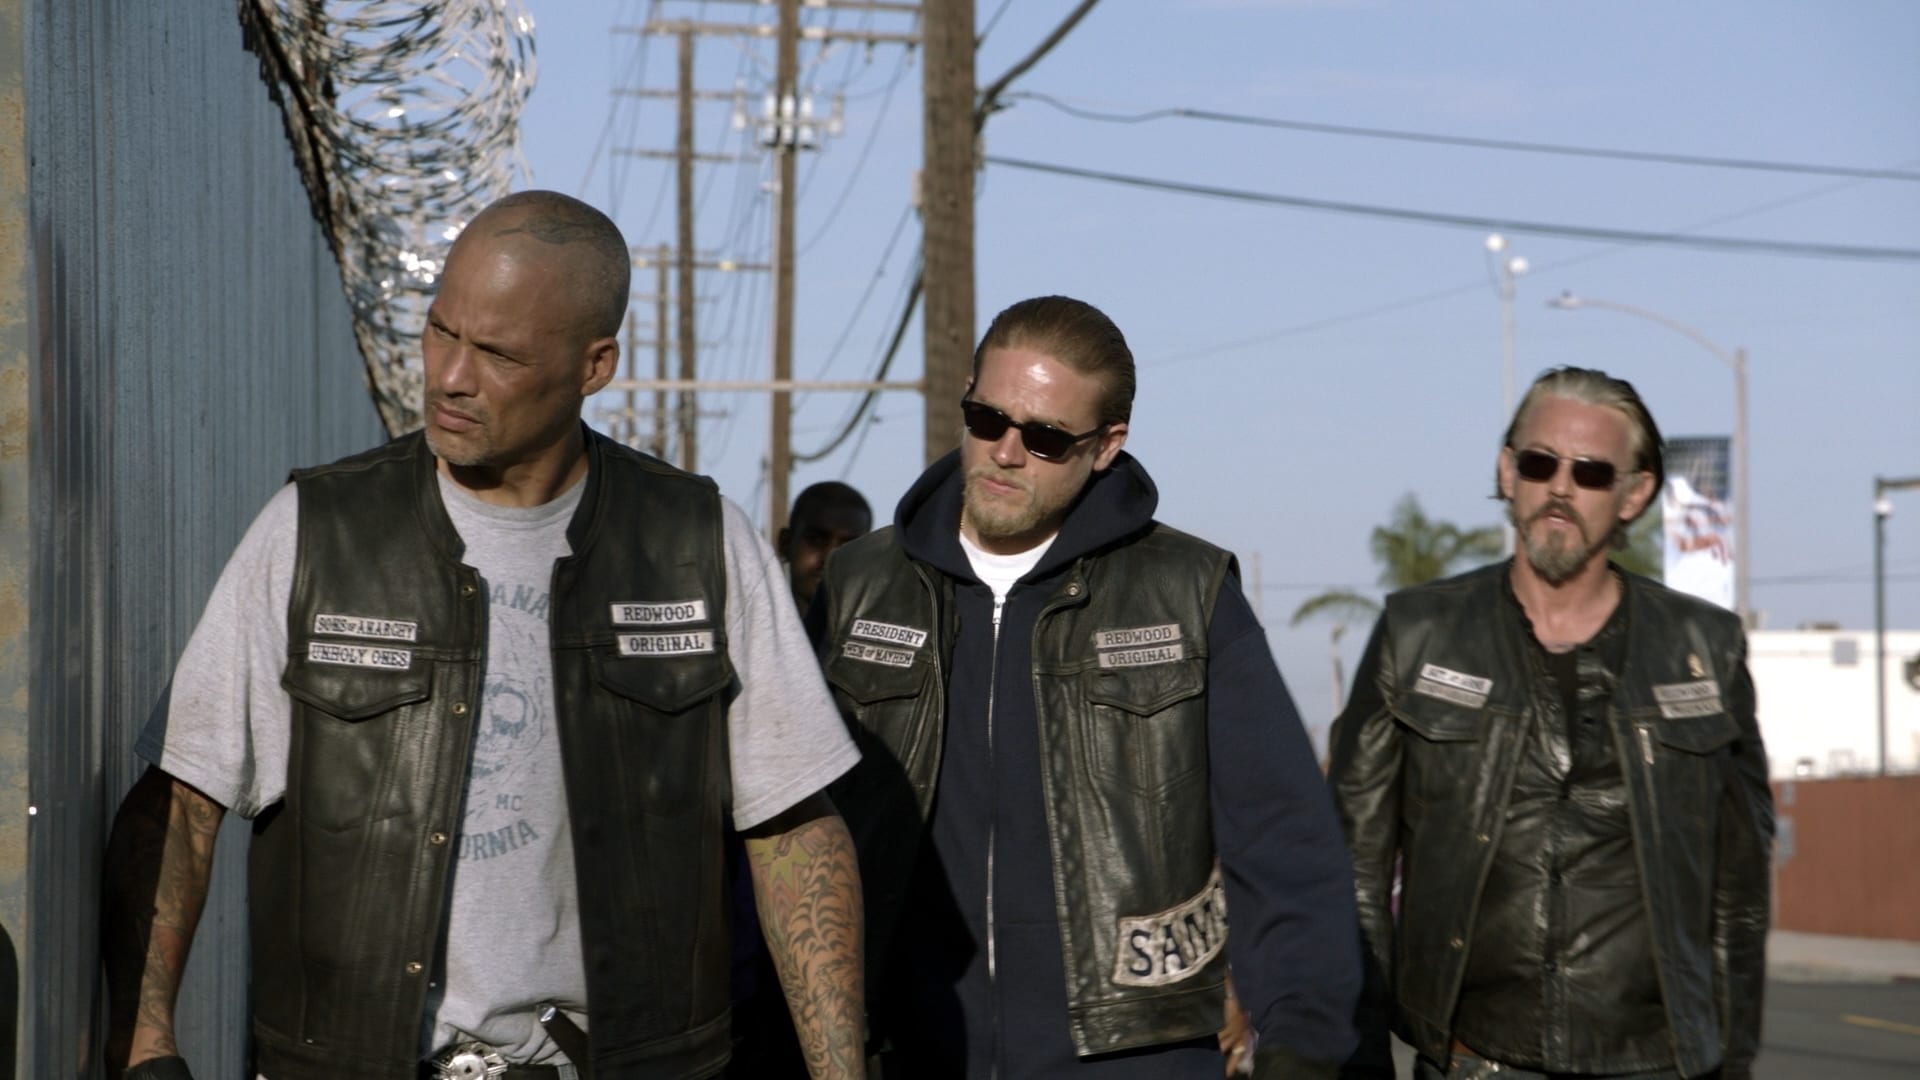 Sons of Anarchy saison 5 episode 8 streaming vf - 𝐏𝐀𝐏𝐘𝐒𝐓𝐑𝐄𝐀𝐌𝐈𝐍𝐆 - Where Can I Watch Sons Of Anarchy All Seasons